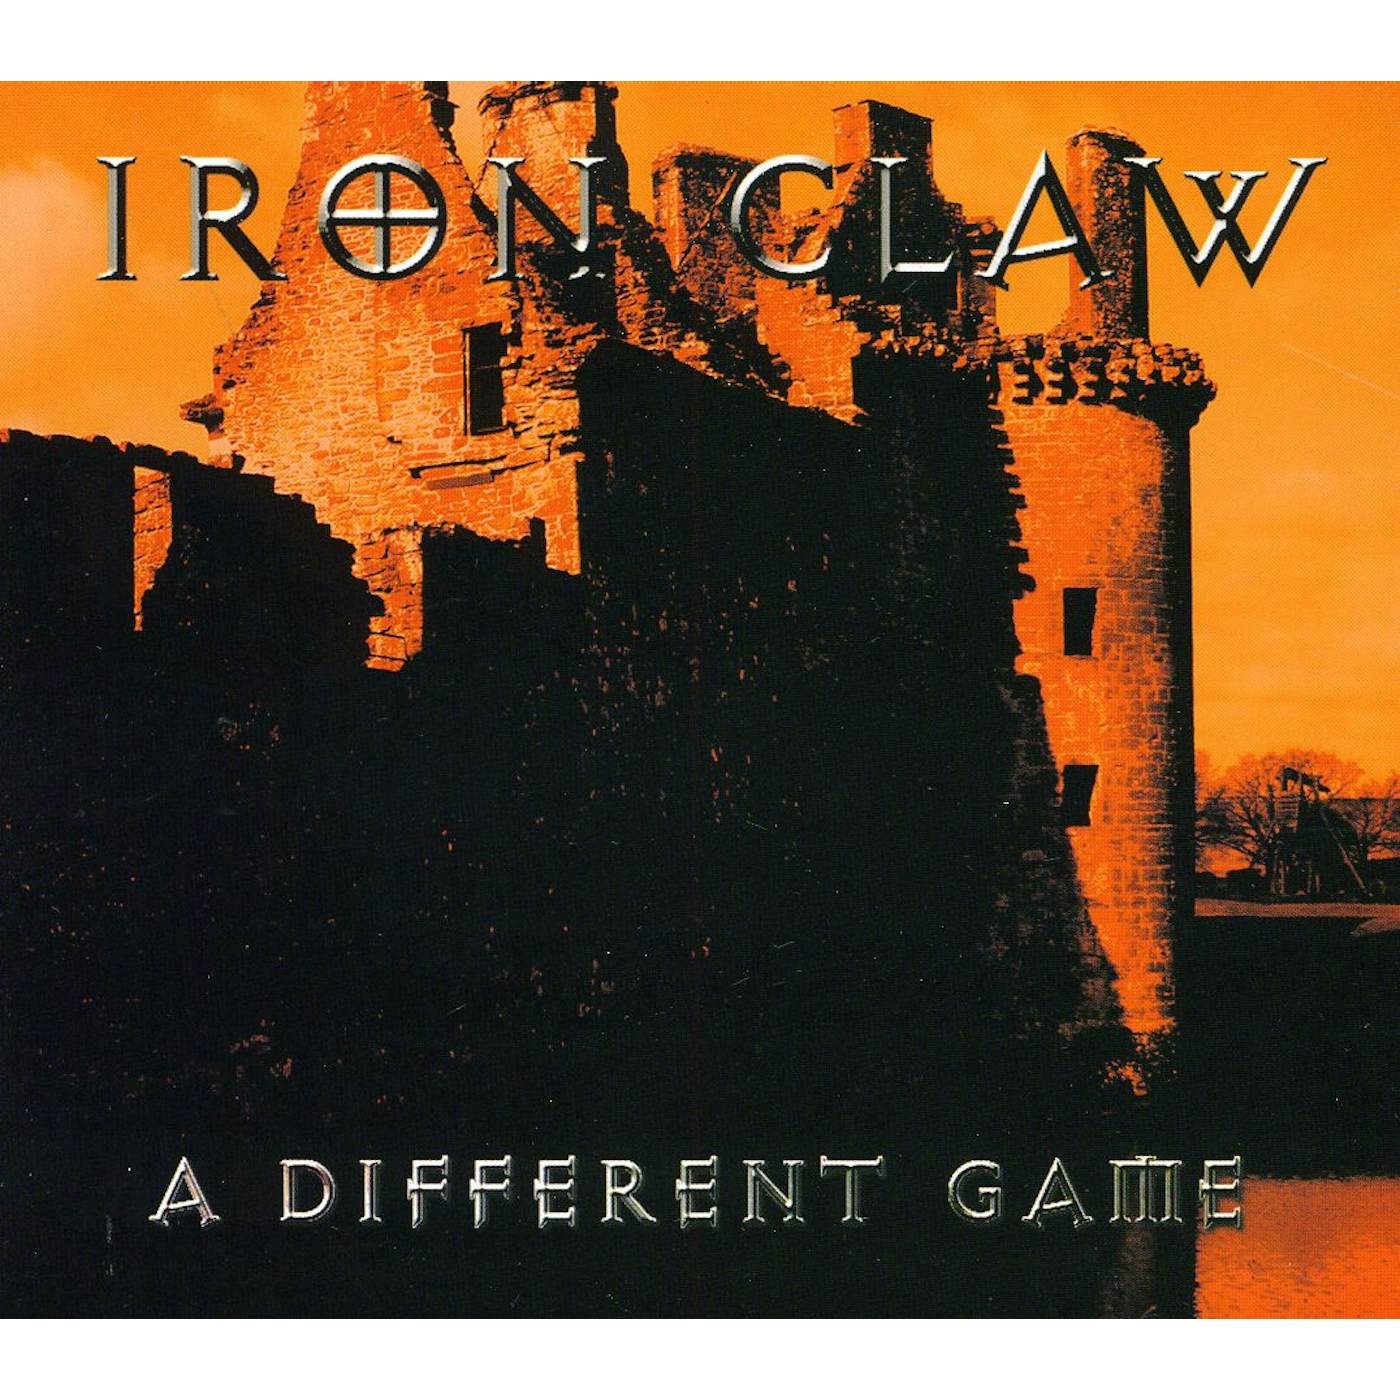 Iron Claw DIFFERENT GAME (DIG) CD